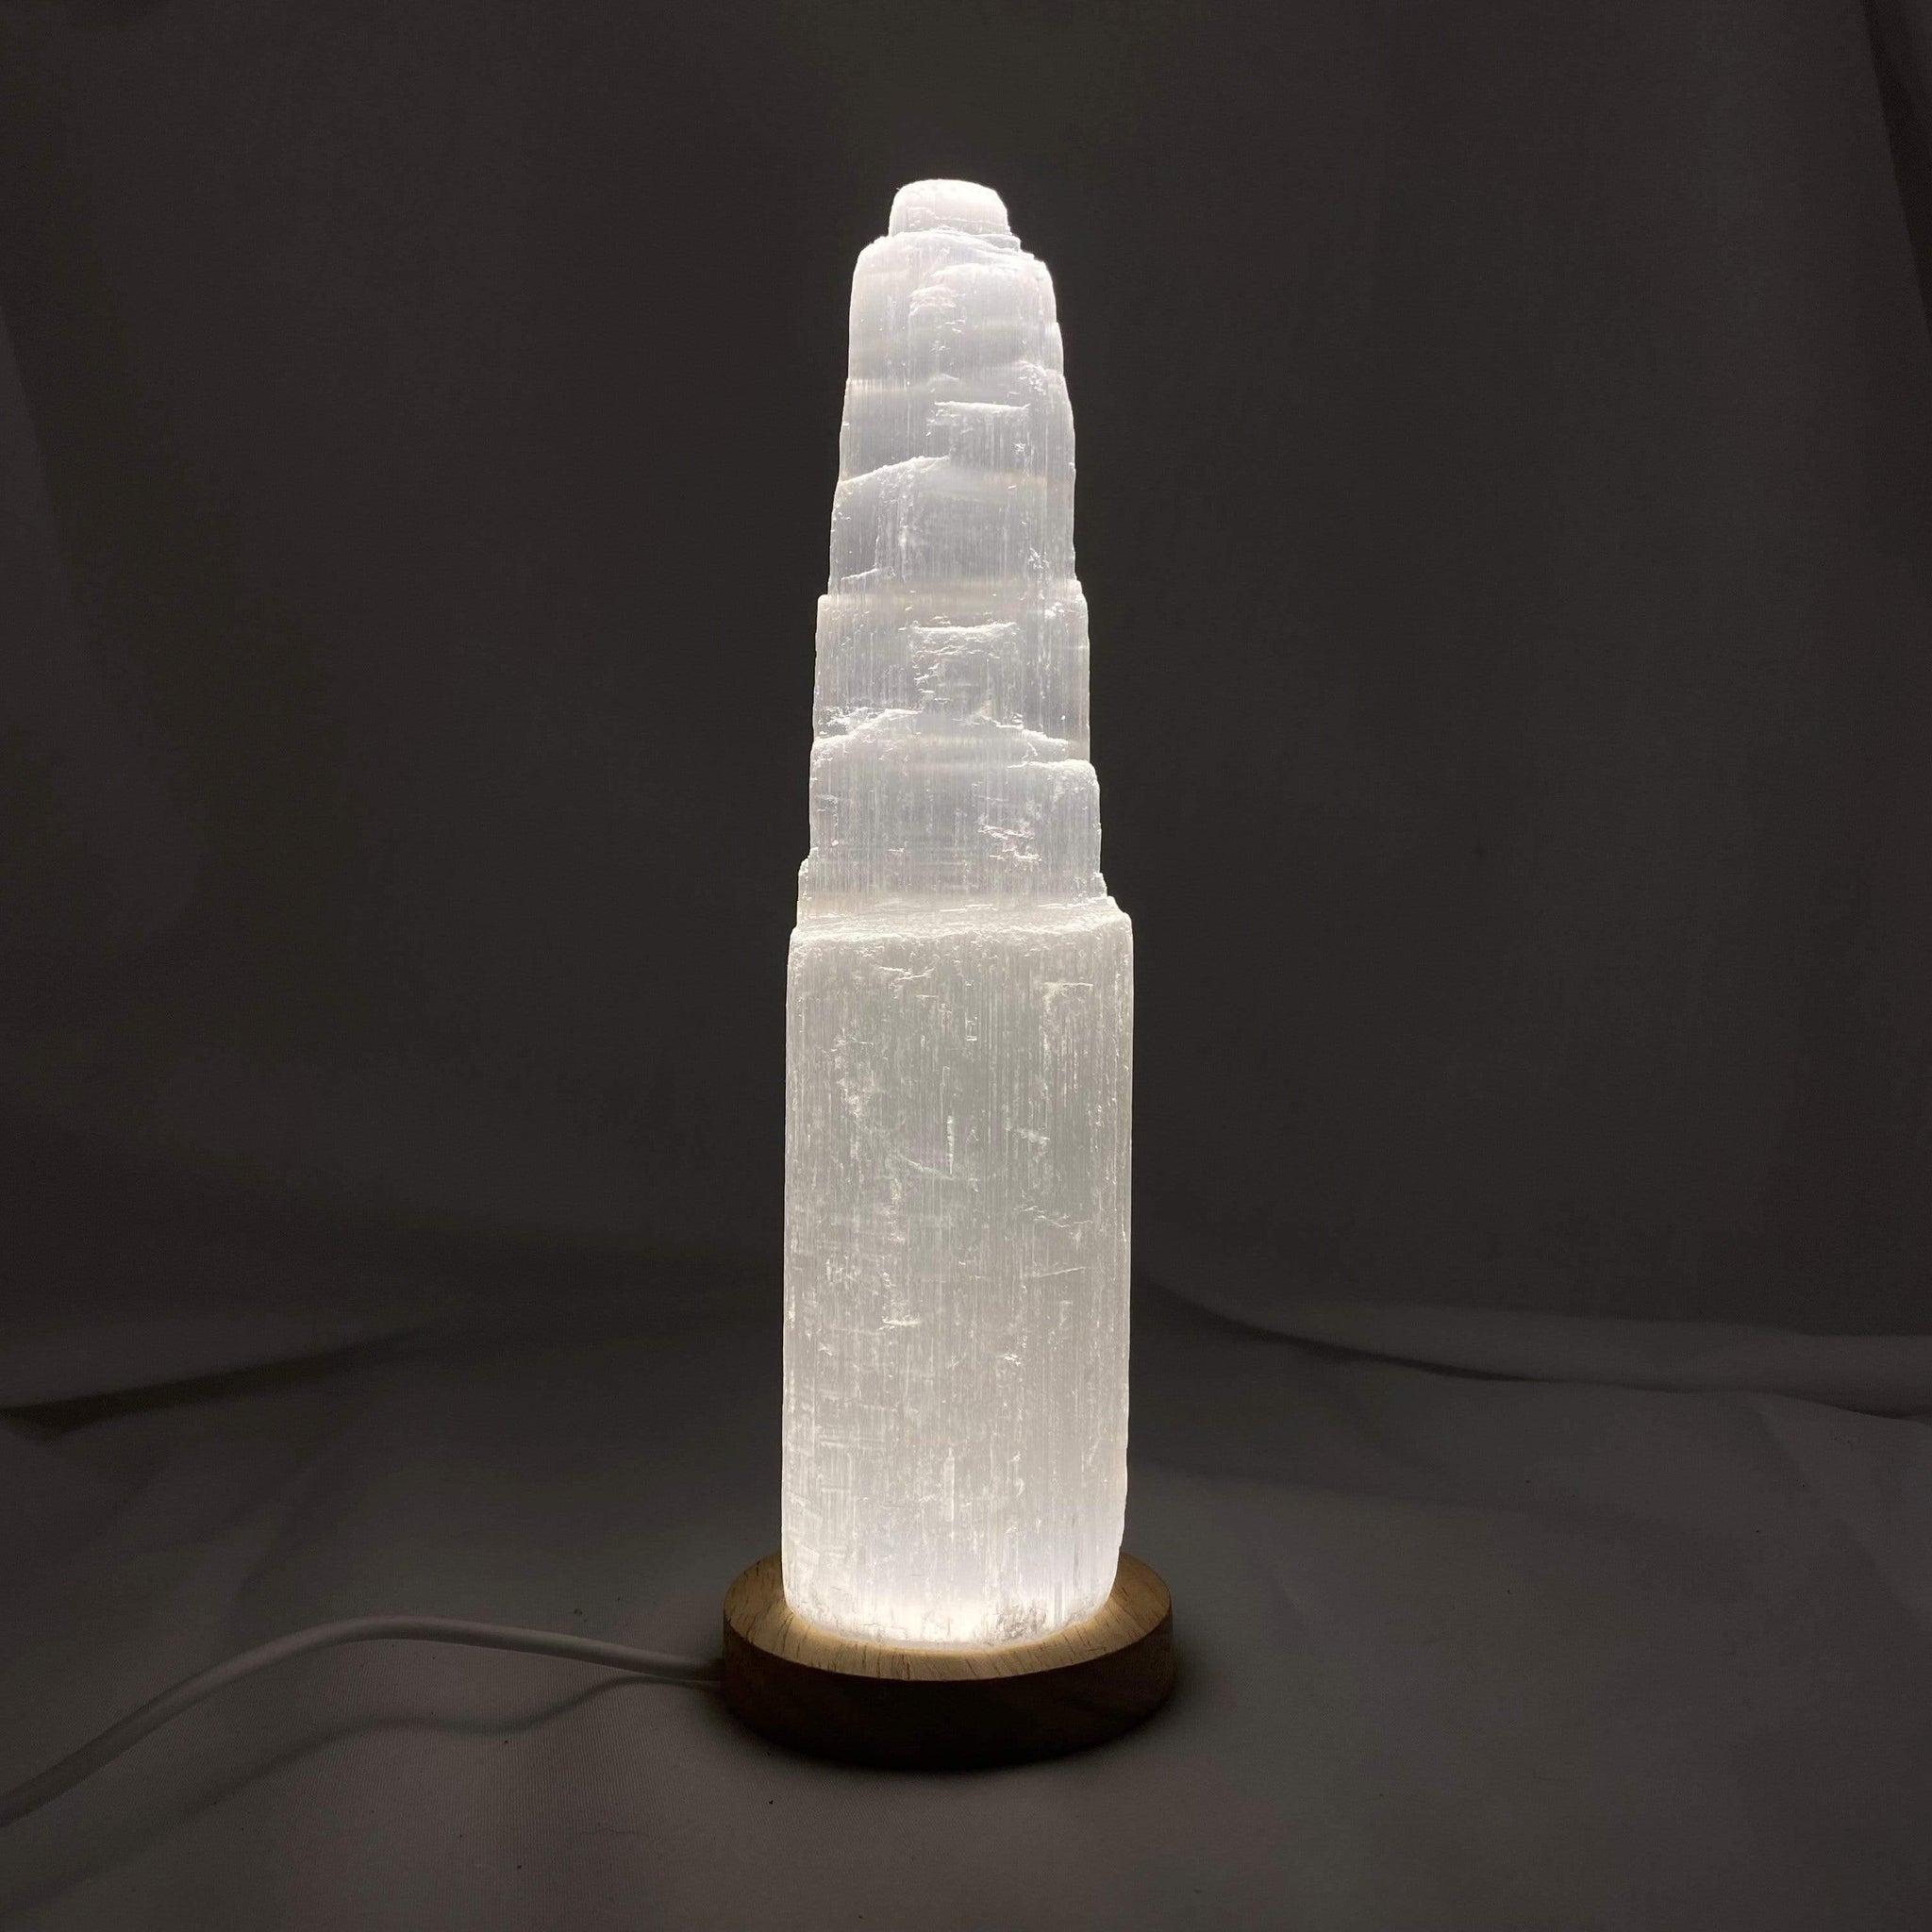 Selenite Tower with LED Base - Inspire Me Naturally 